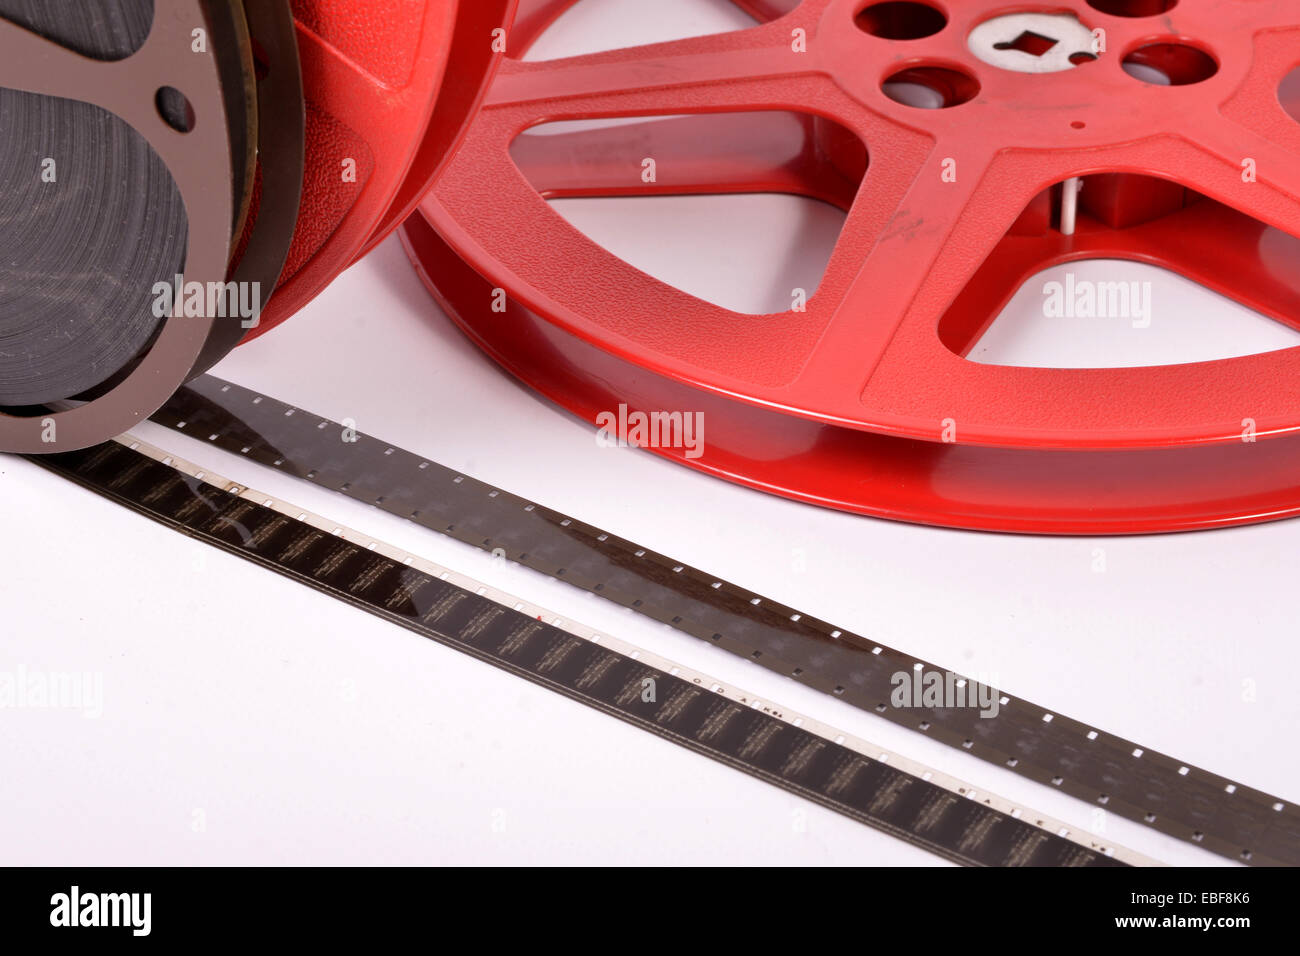 16mm movie files with films reels . Stock Photo